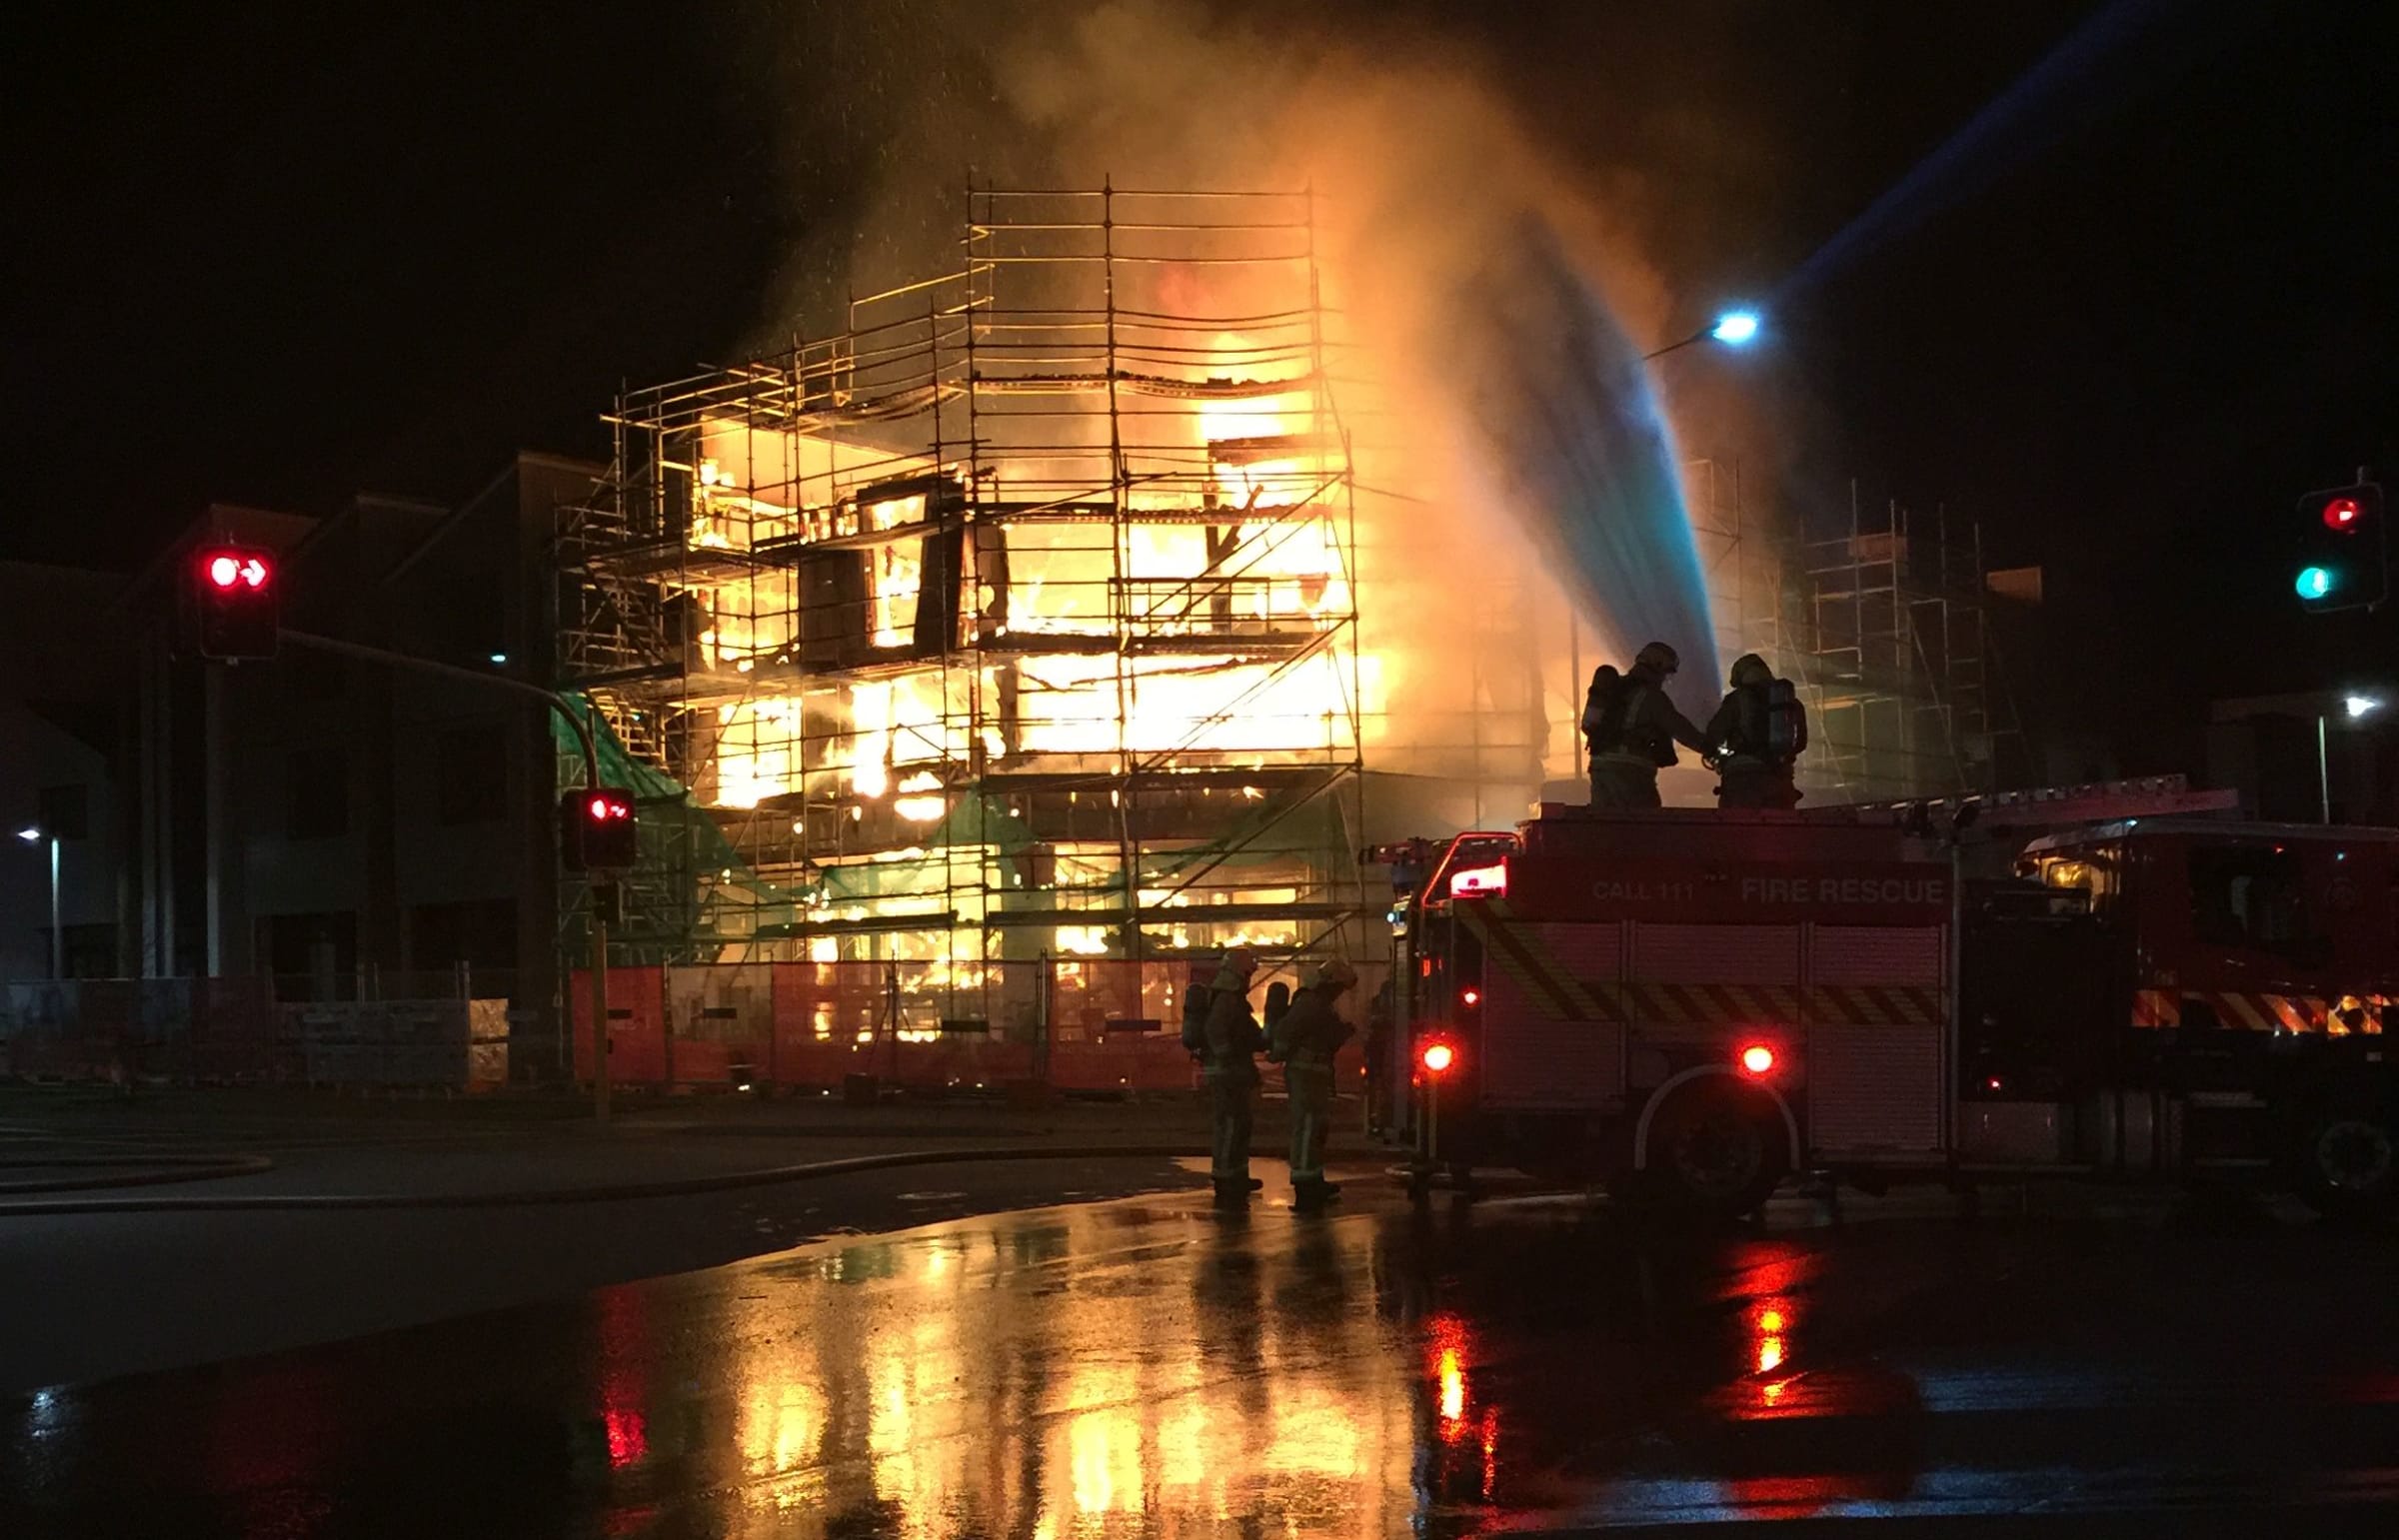 Flames engulfed a multi-storey building in the housing development.